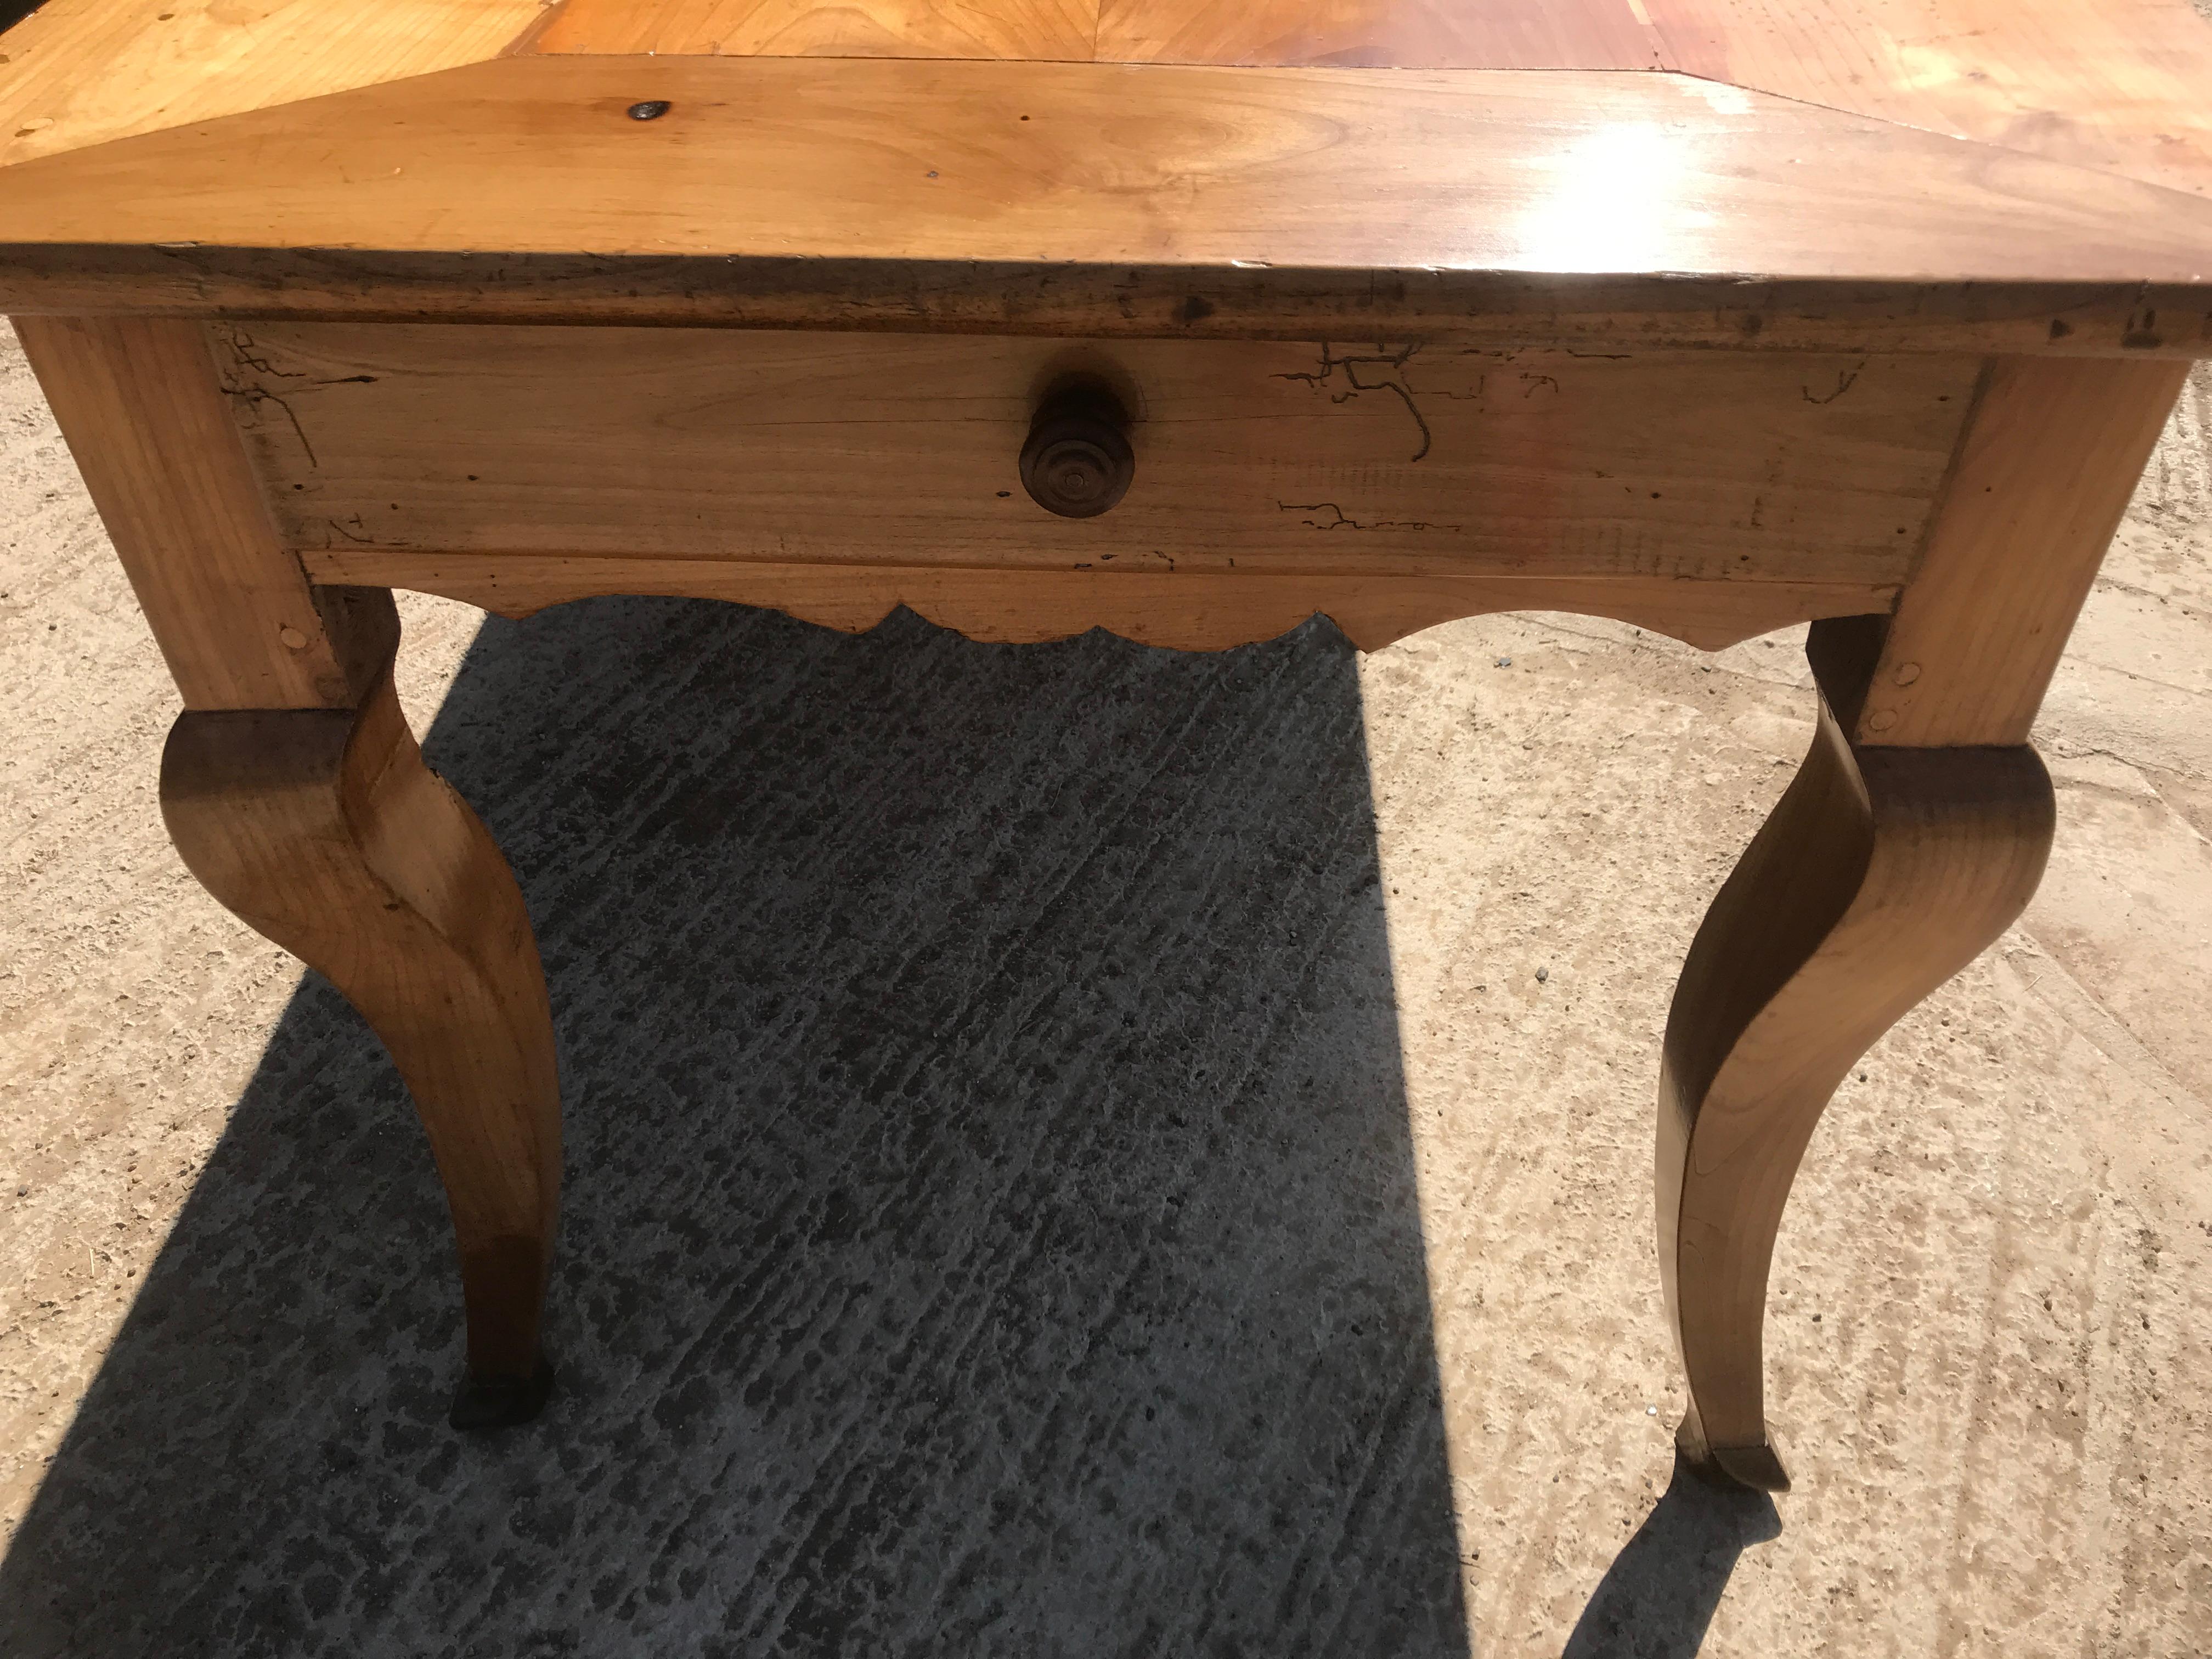 19th Century French Cherrywood Farmhouse Dining Table